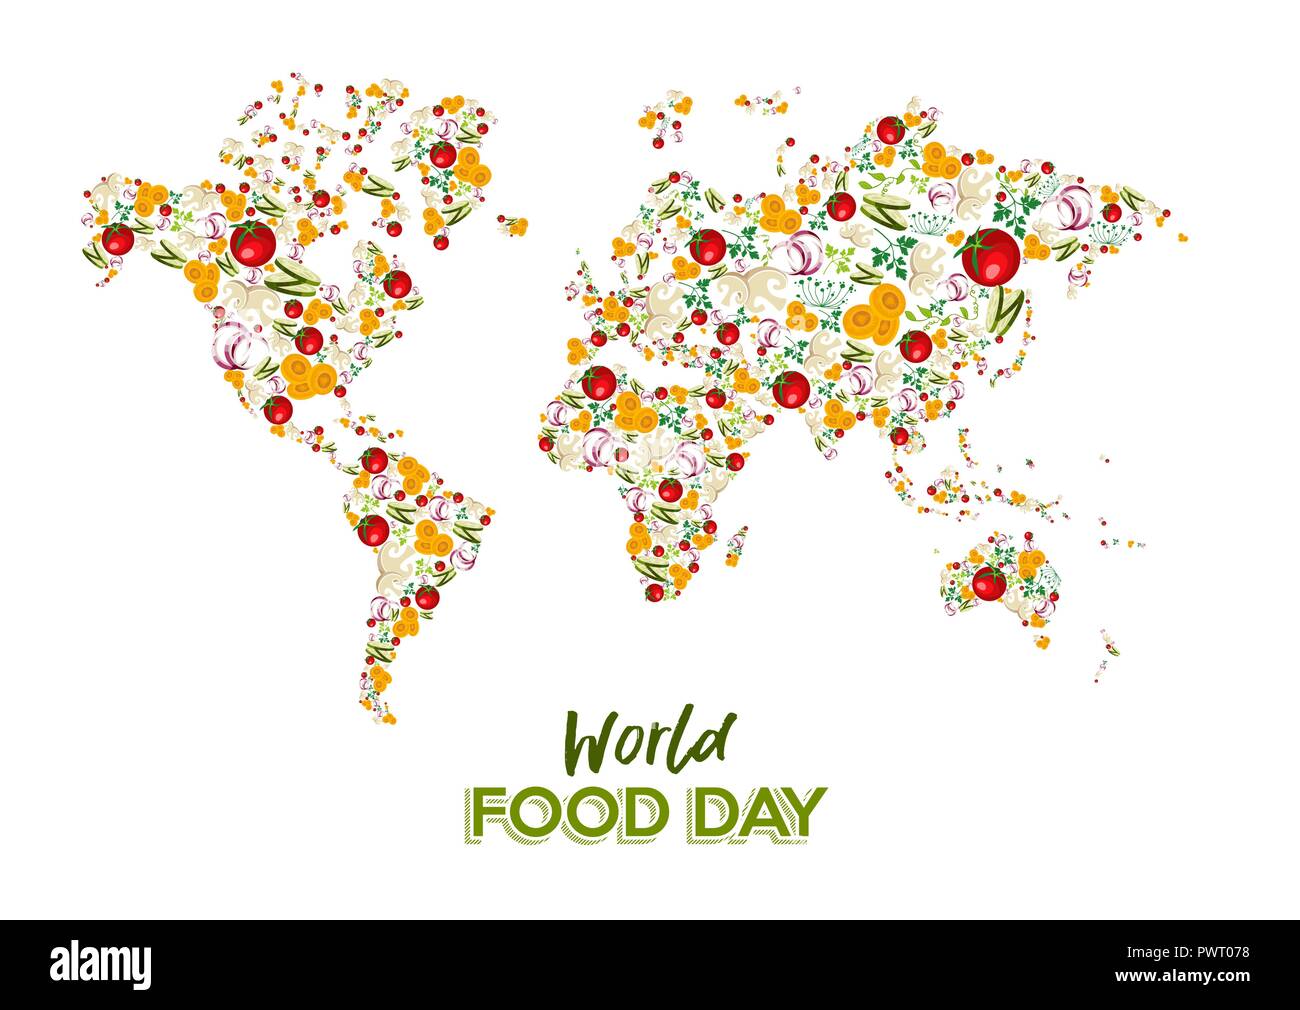 Food Day greeting card illustration for nutrition and healthy diet with vegetable world map concept. Stock Vector